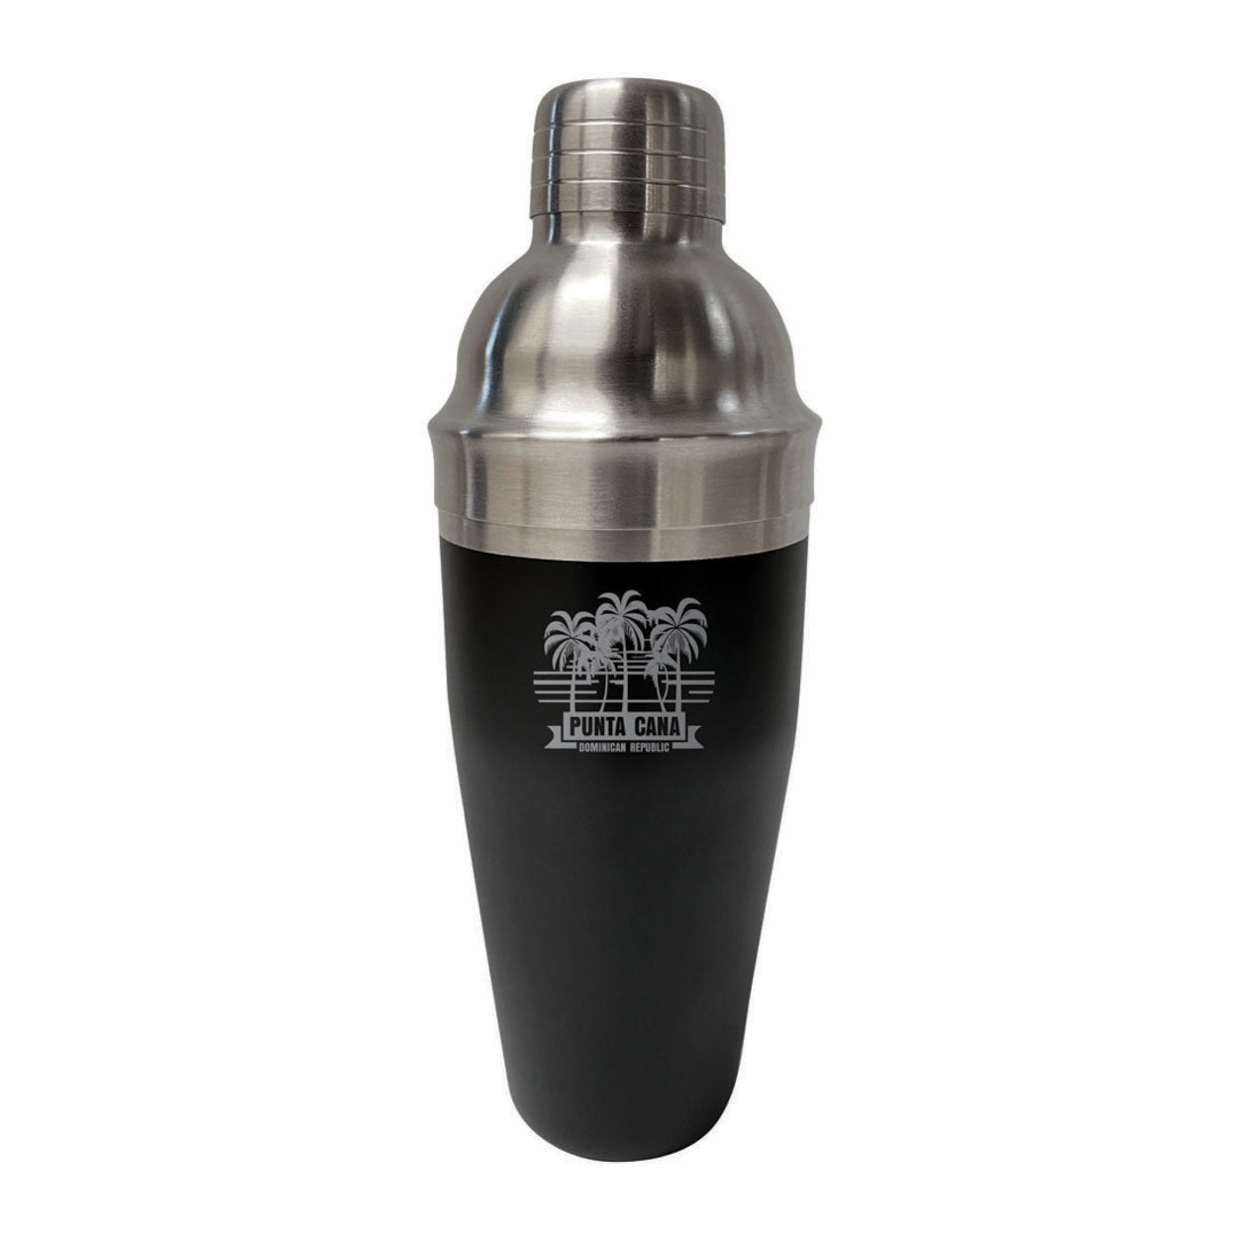 Punta Cana Dominican Republic Souvenir 24 Oz Stainless Steel Cocktail Shaker - Palm 3